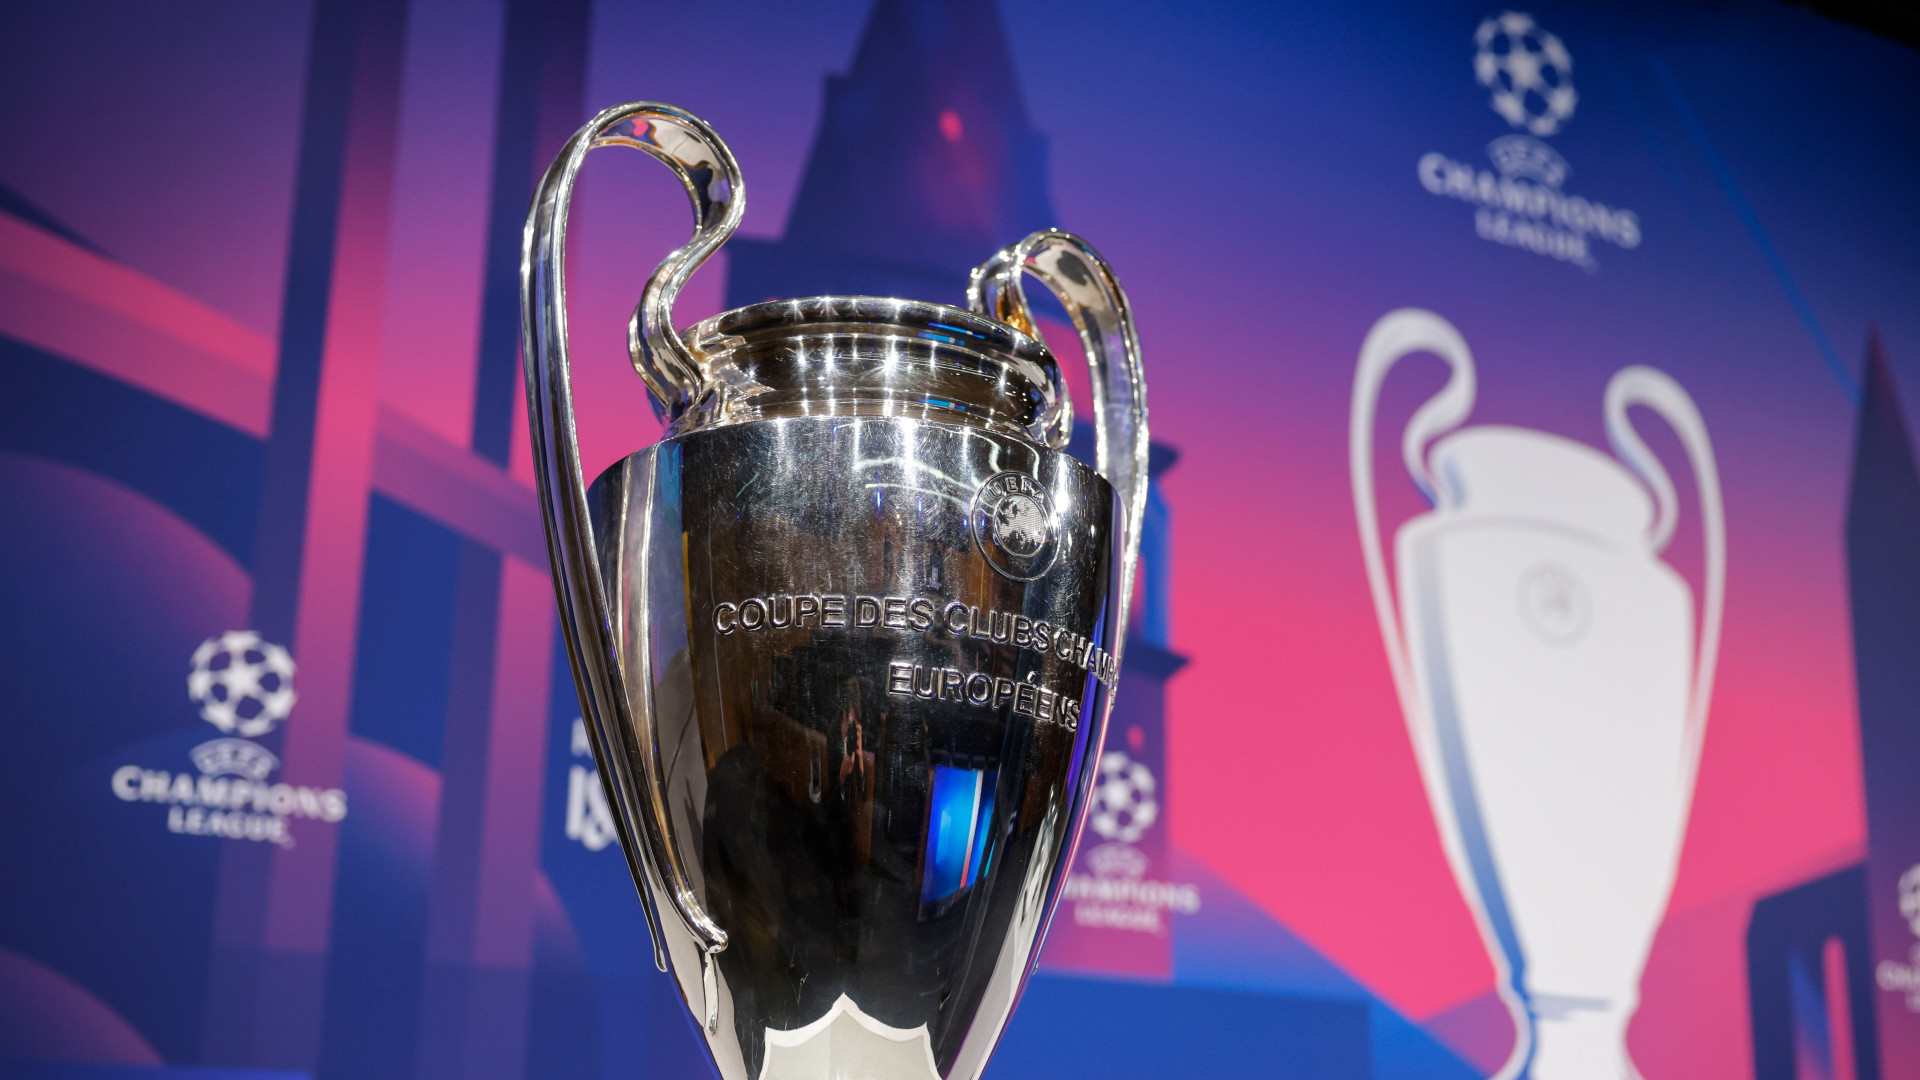 The Champions League trophy in a file photo. (Image credit: Twitter)